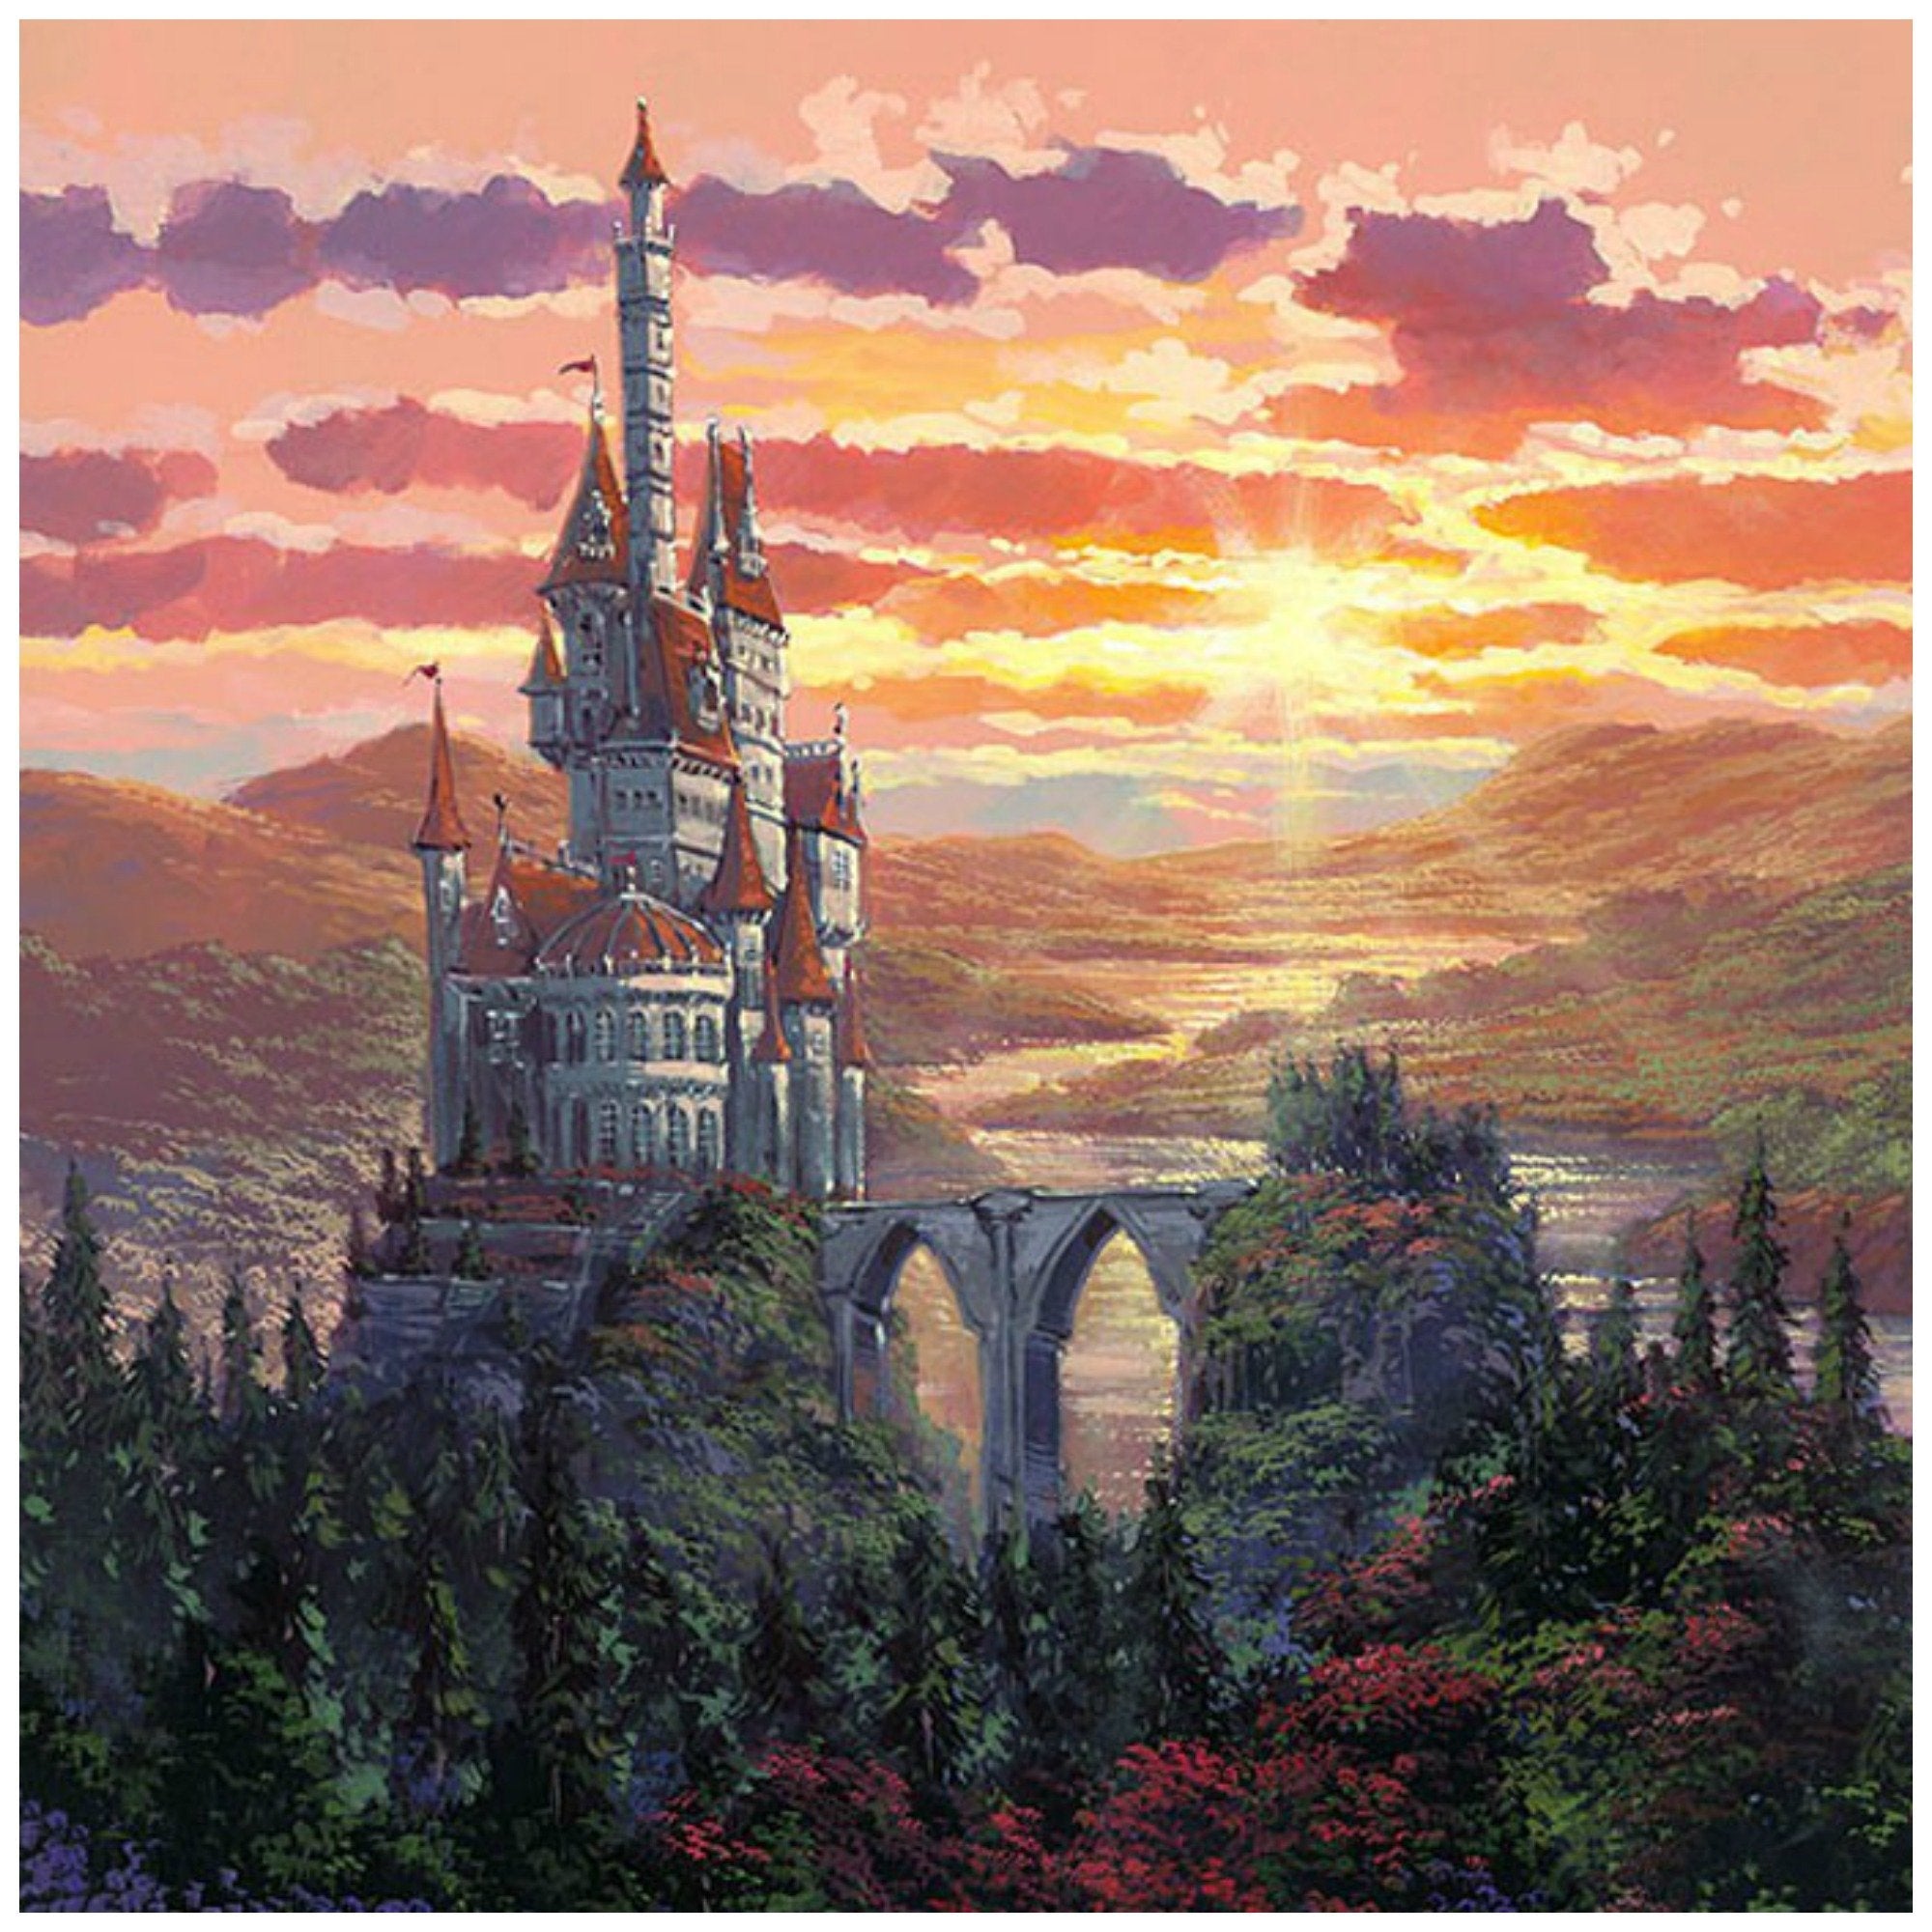 The Beauty in the Beast's Kingdom by Rodel Gonzalez.  A stunting sunset view of the Beast's castle - closeup